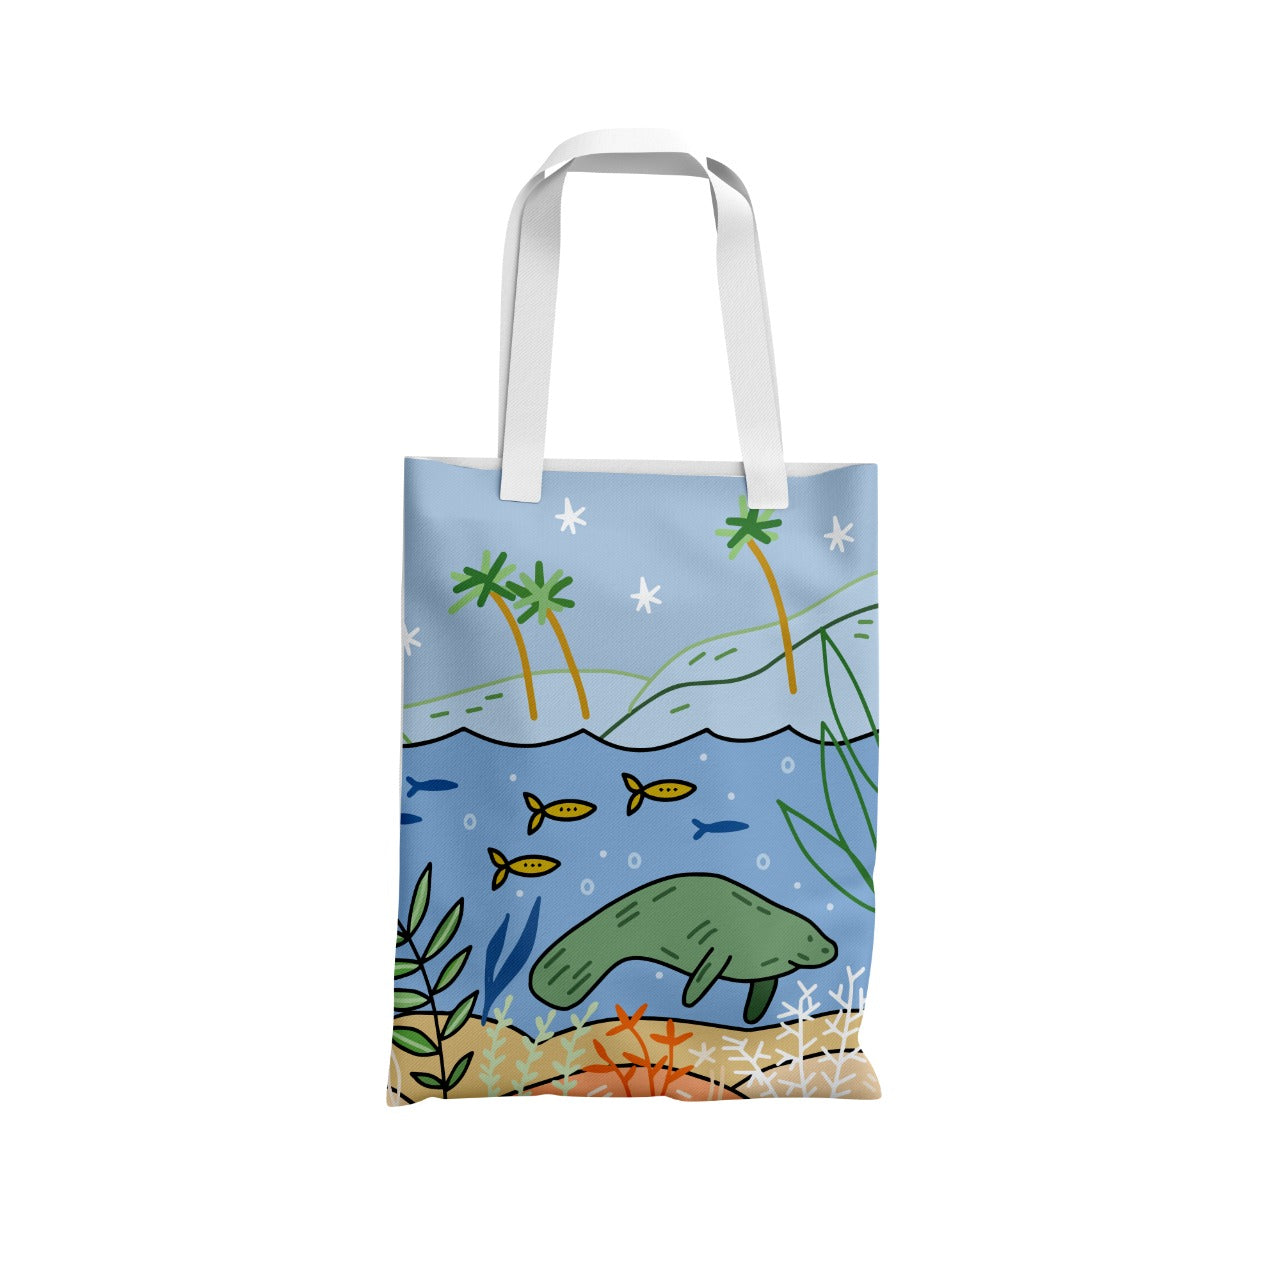 SOLD OUT! TROPI TOTE reusable tote bag